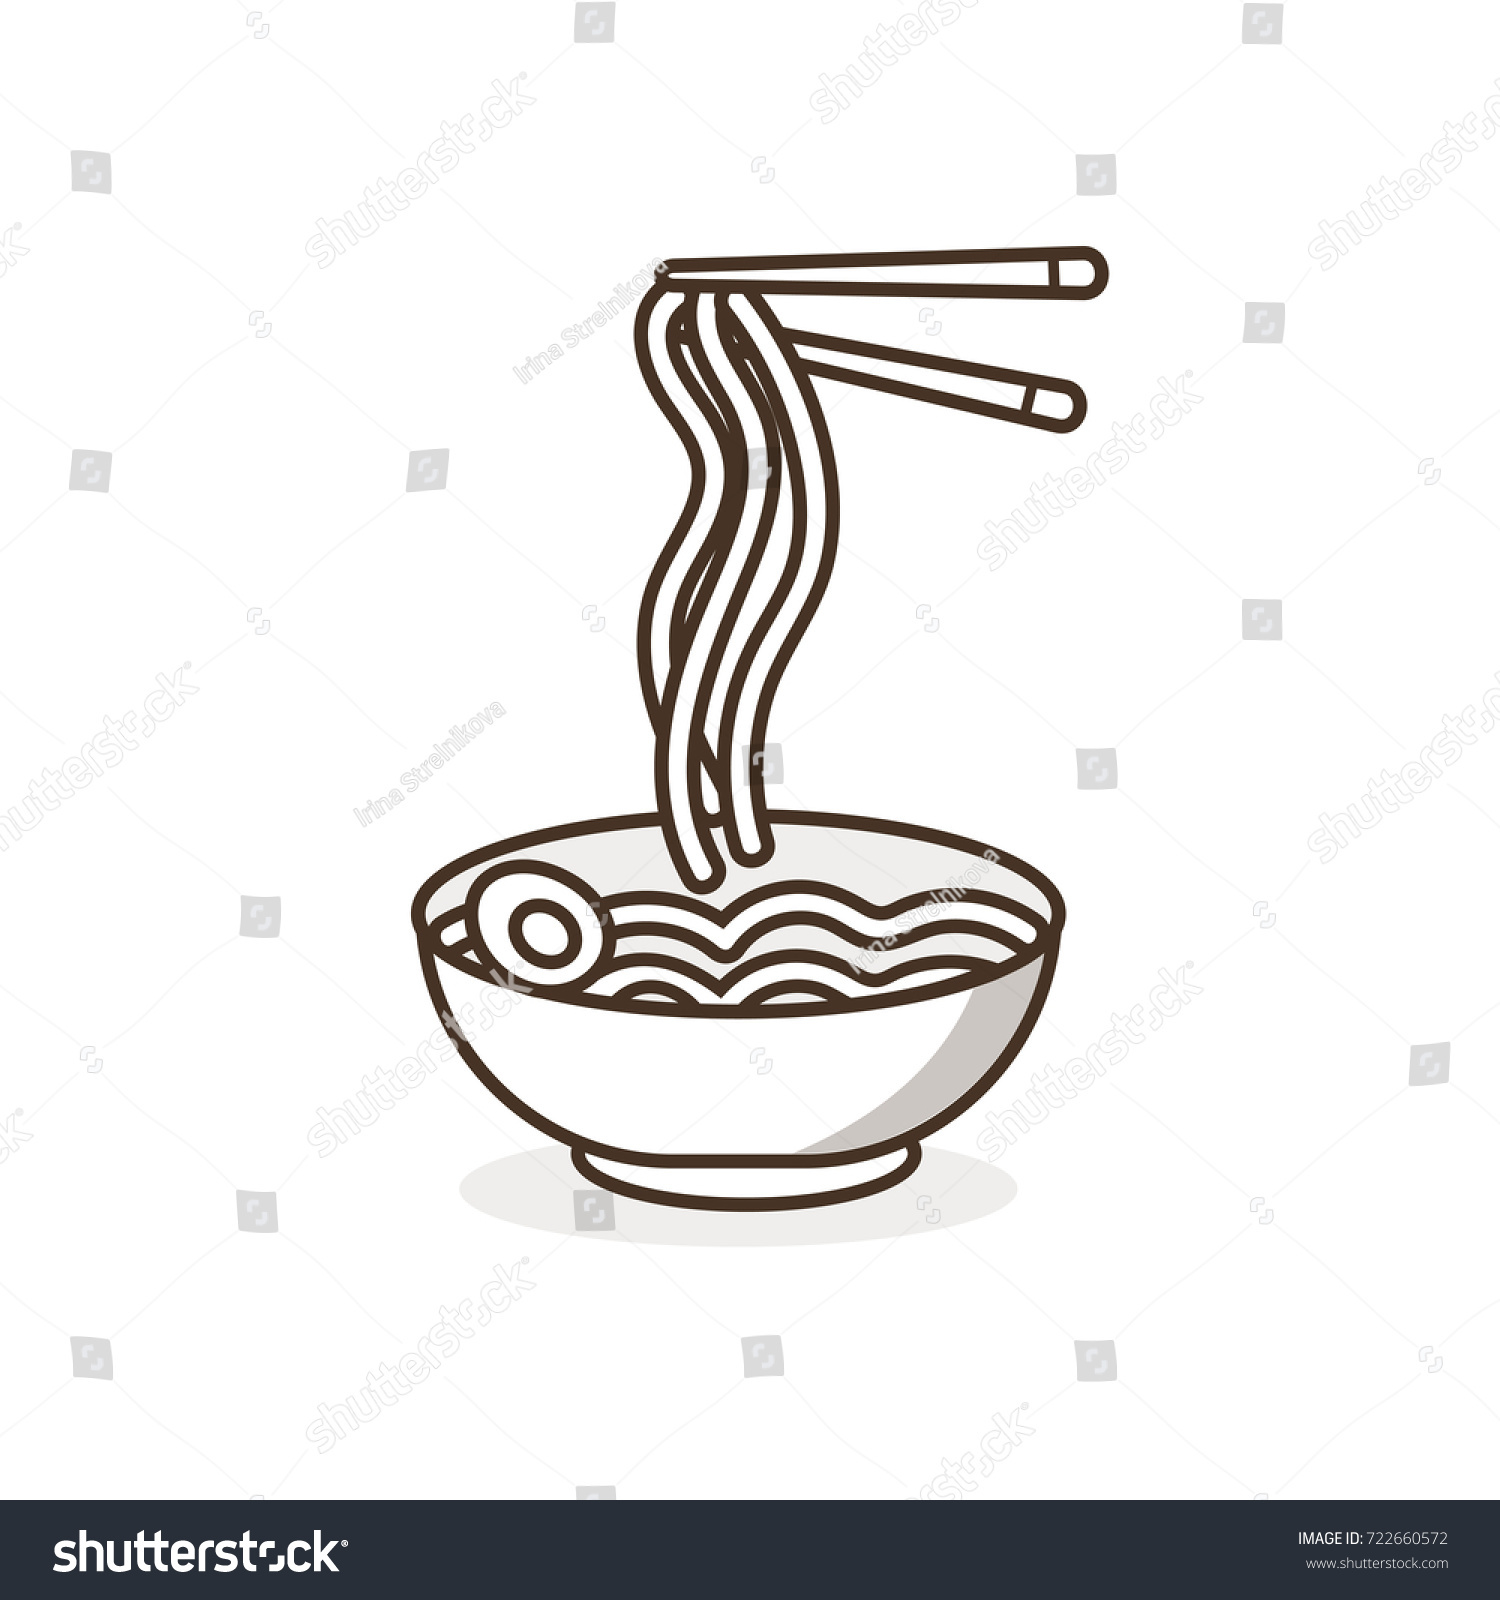 How To Draw Ramen Noodles Step By Step Japanese ramen noodles come in